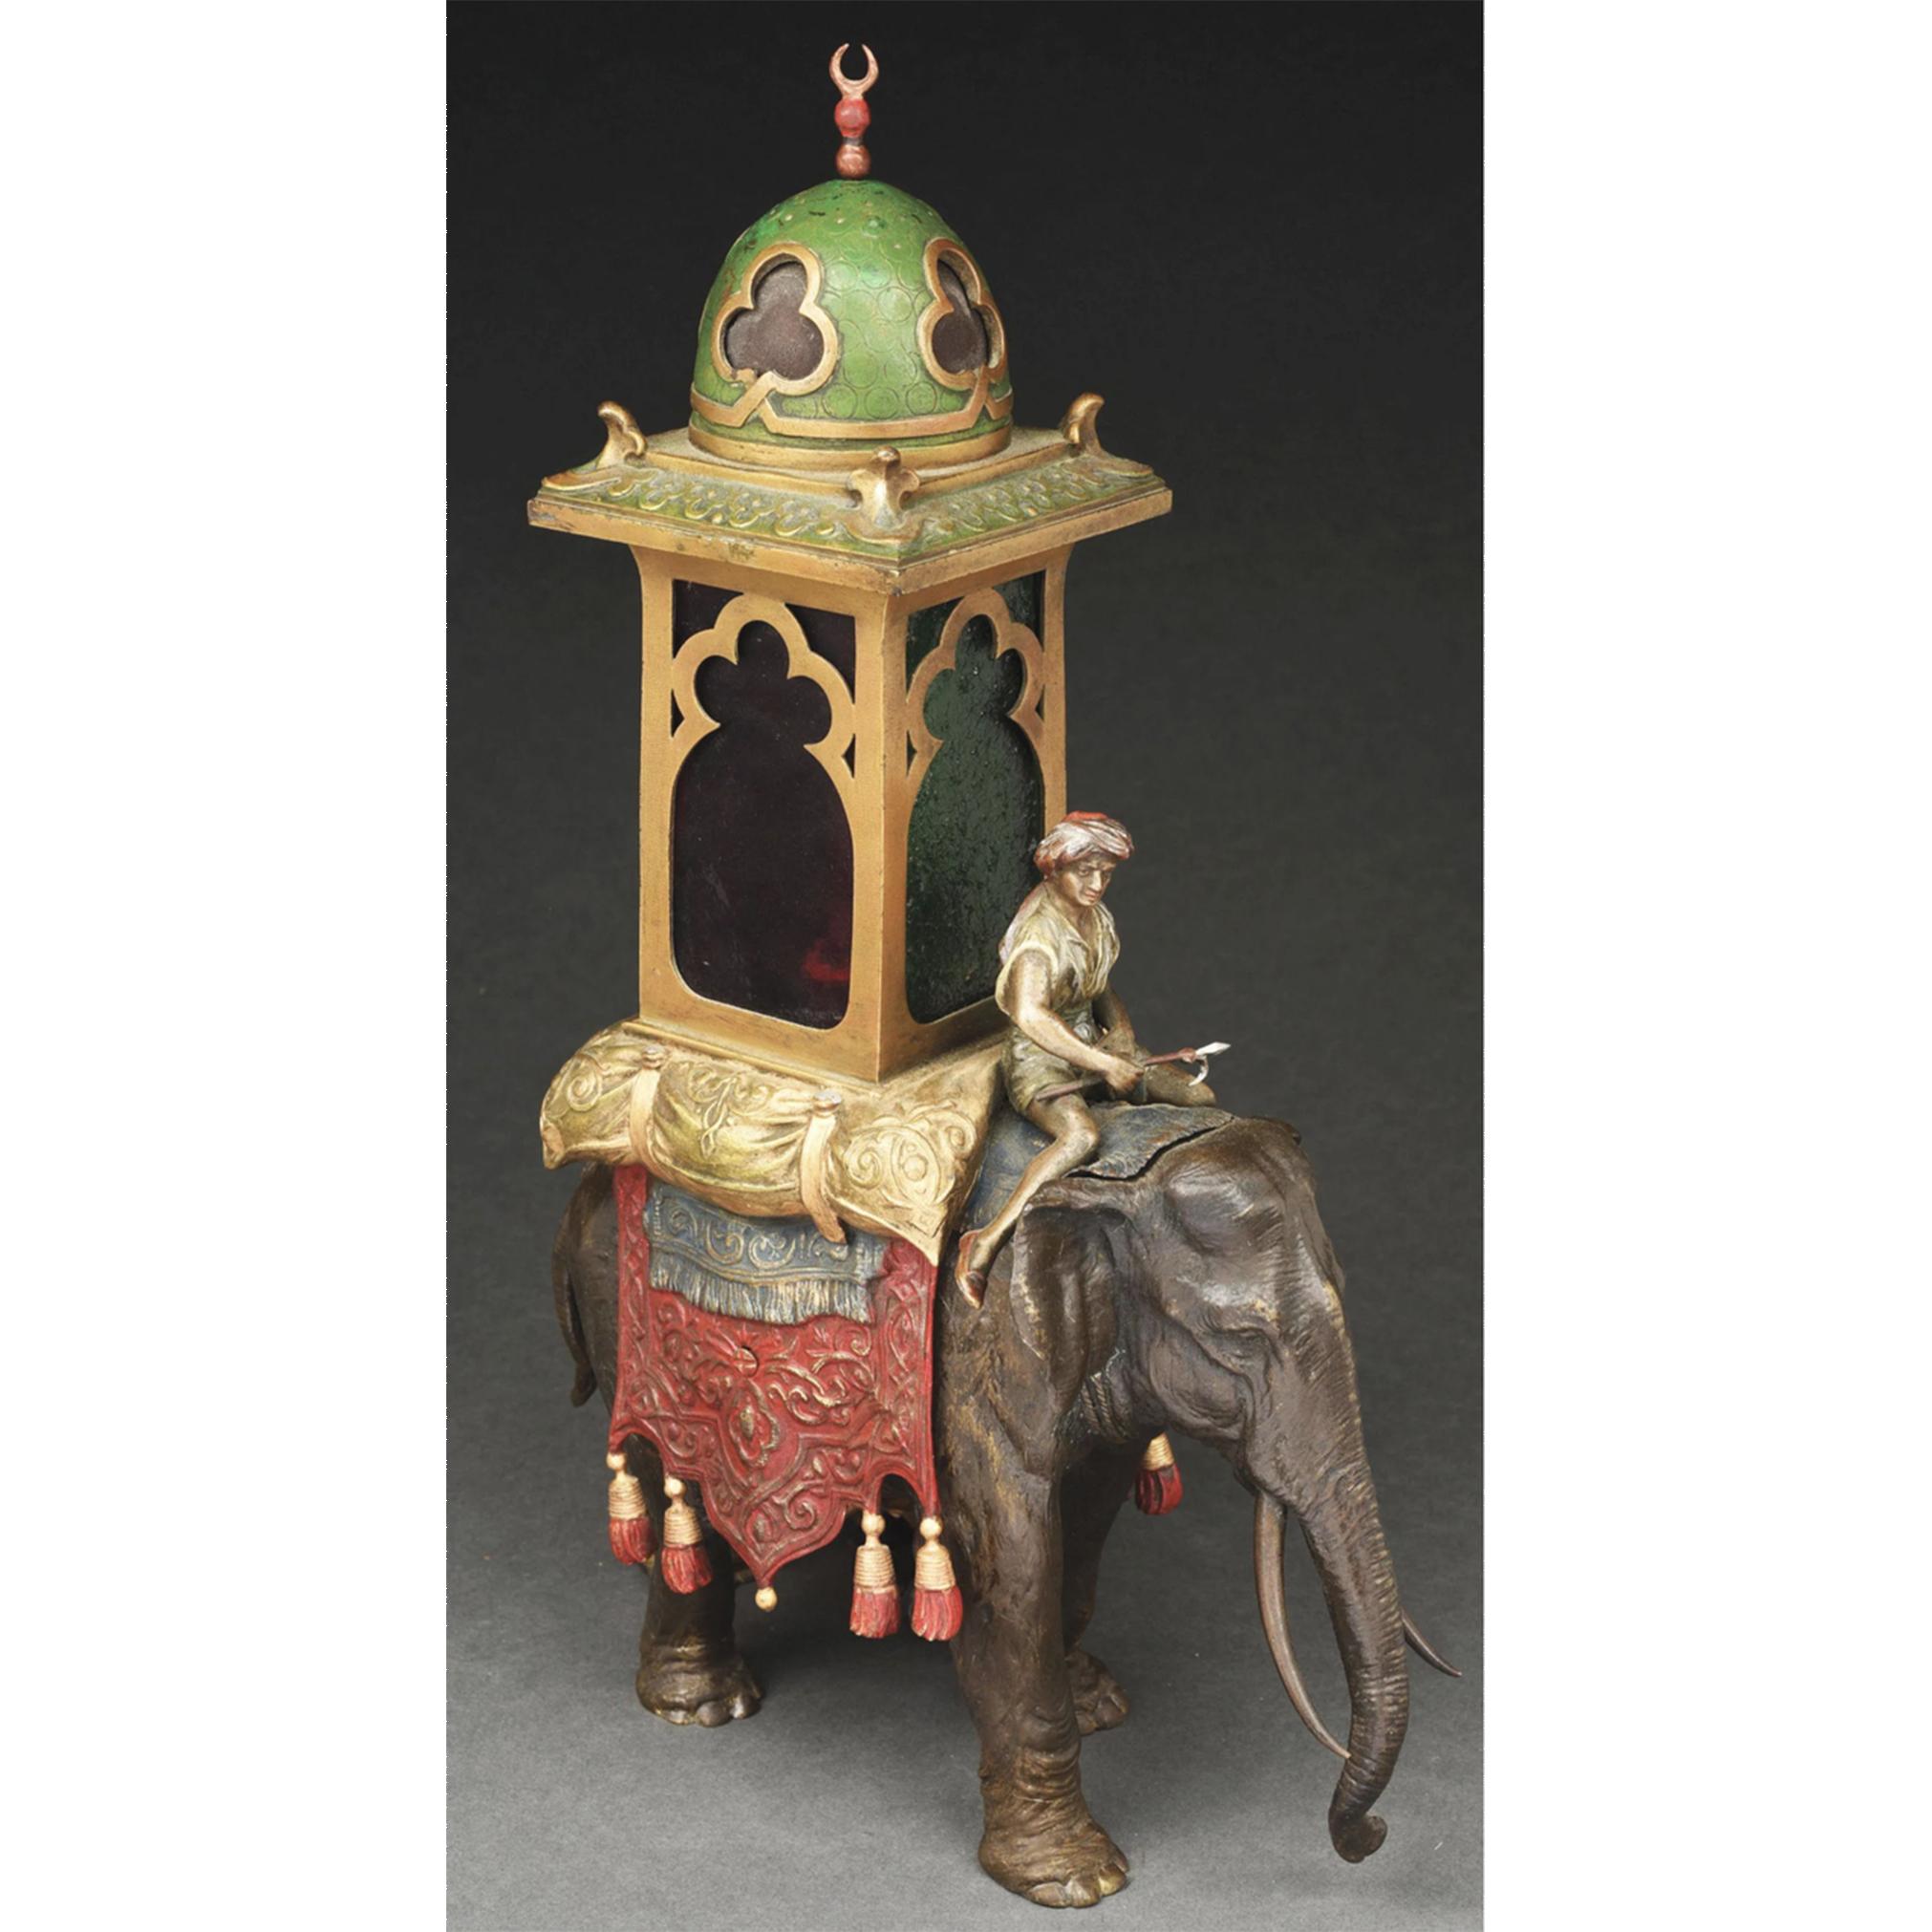 A beautiful Austrian cold painted bronze lamp. The 16” tall lamp with middle eastern motif, feature a large, bronze elephant being ridden by a man, with colorful carpets draped over the elephant. A red and green glass chamber rests atop a gold